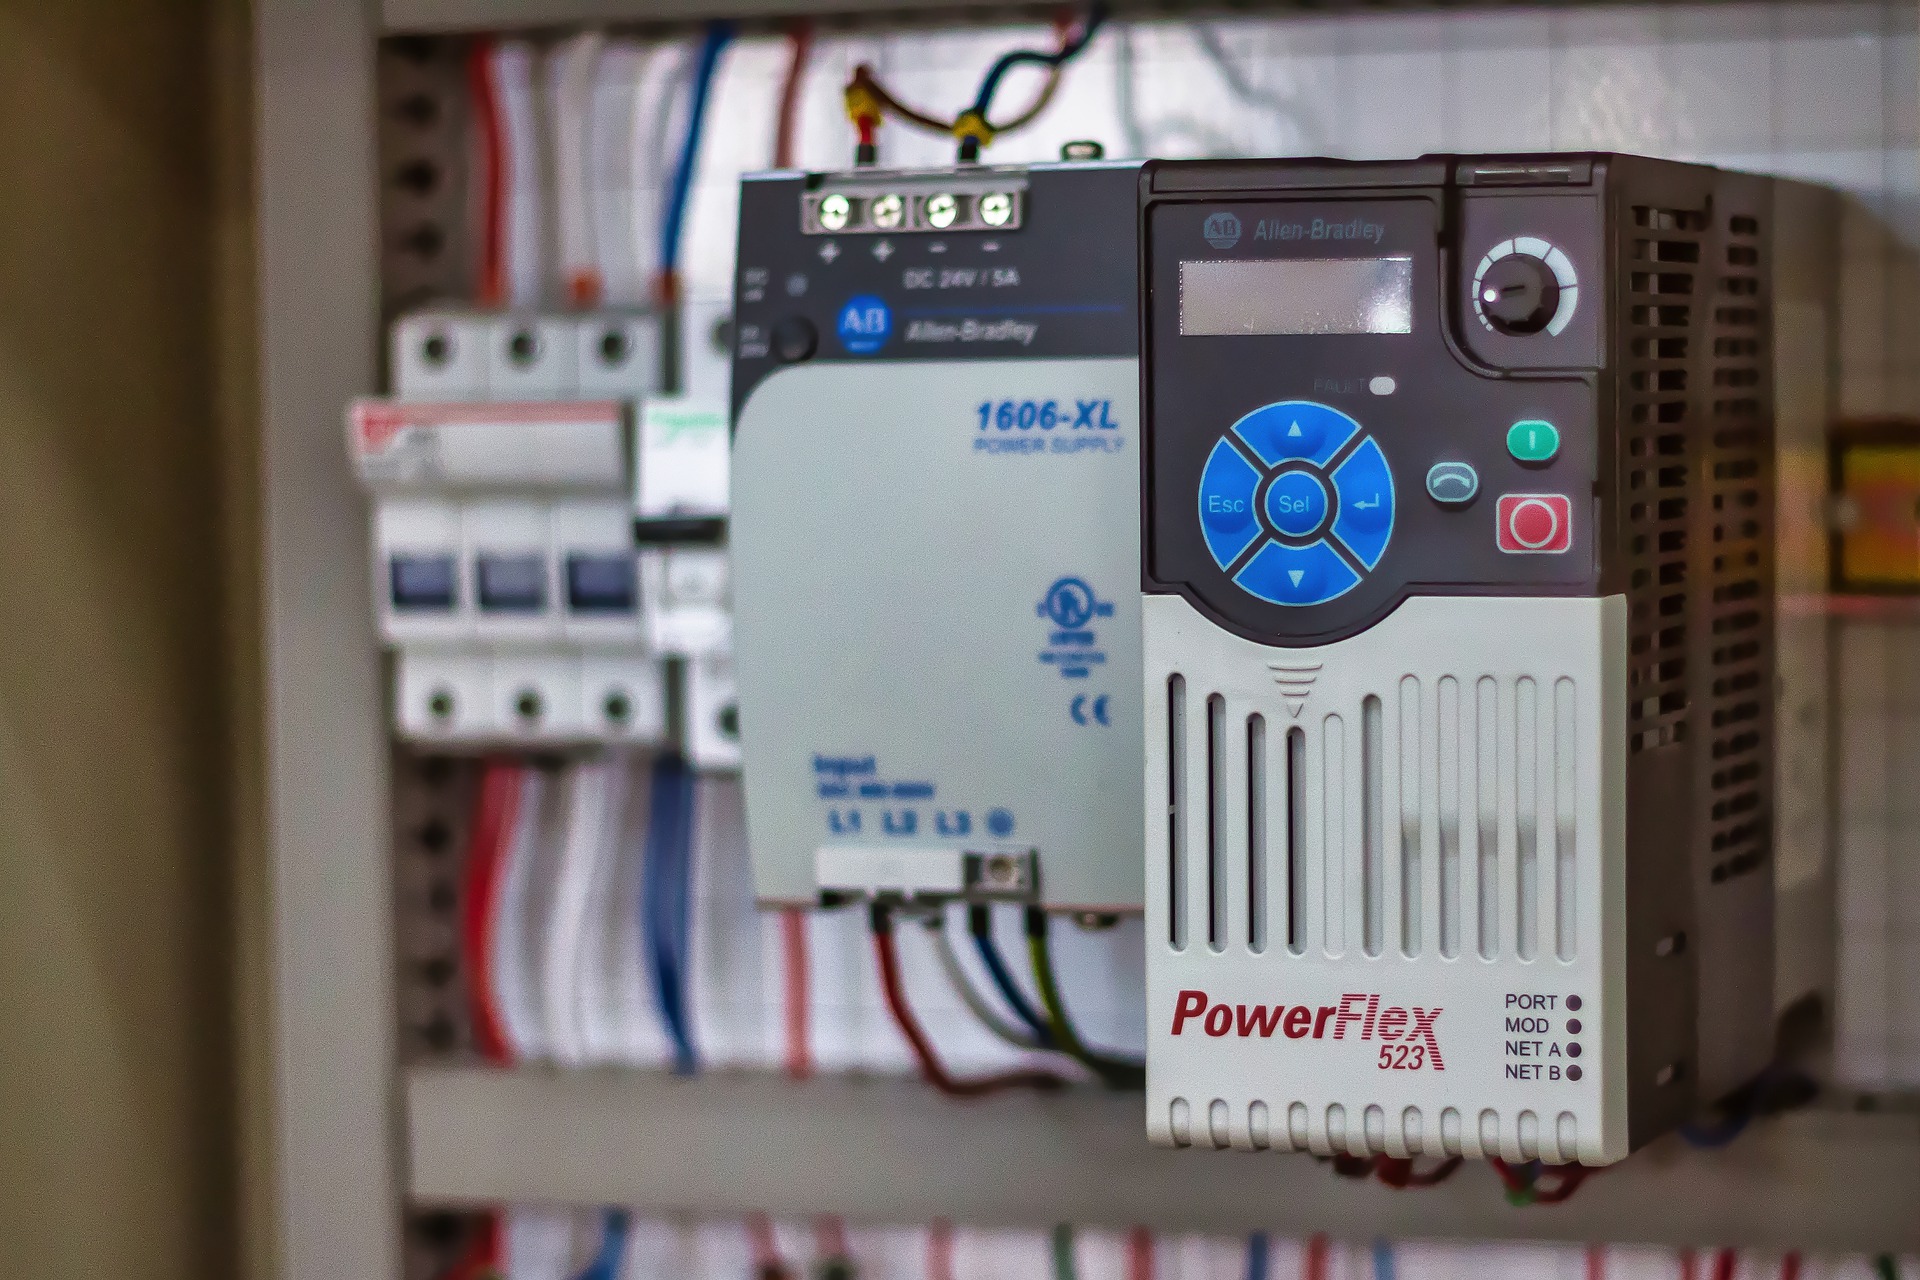 Powered Engineering uses Keyence Programmable Logic Controllers in their automation and control system designs